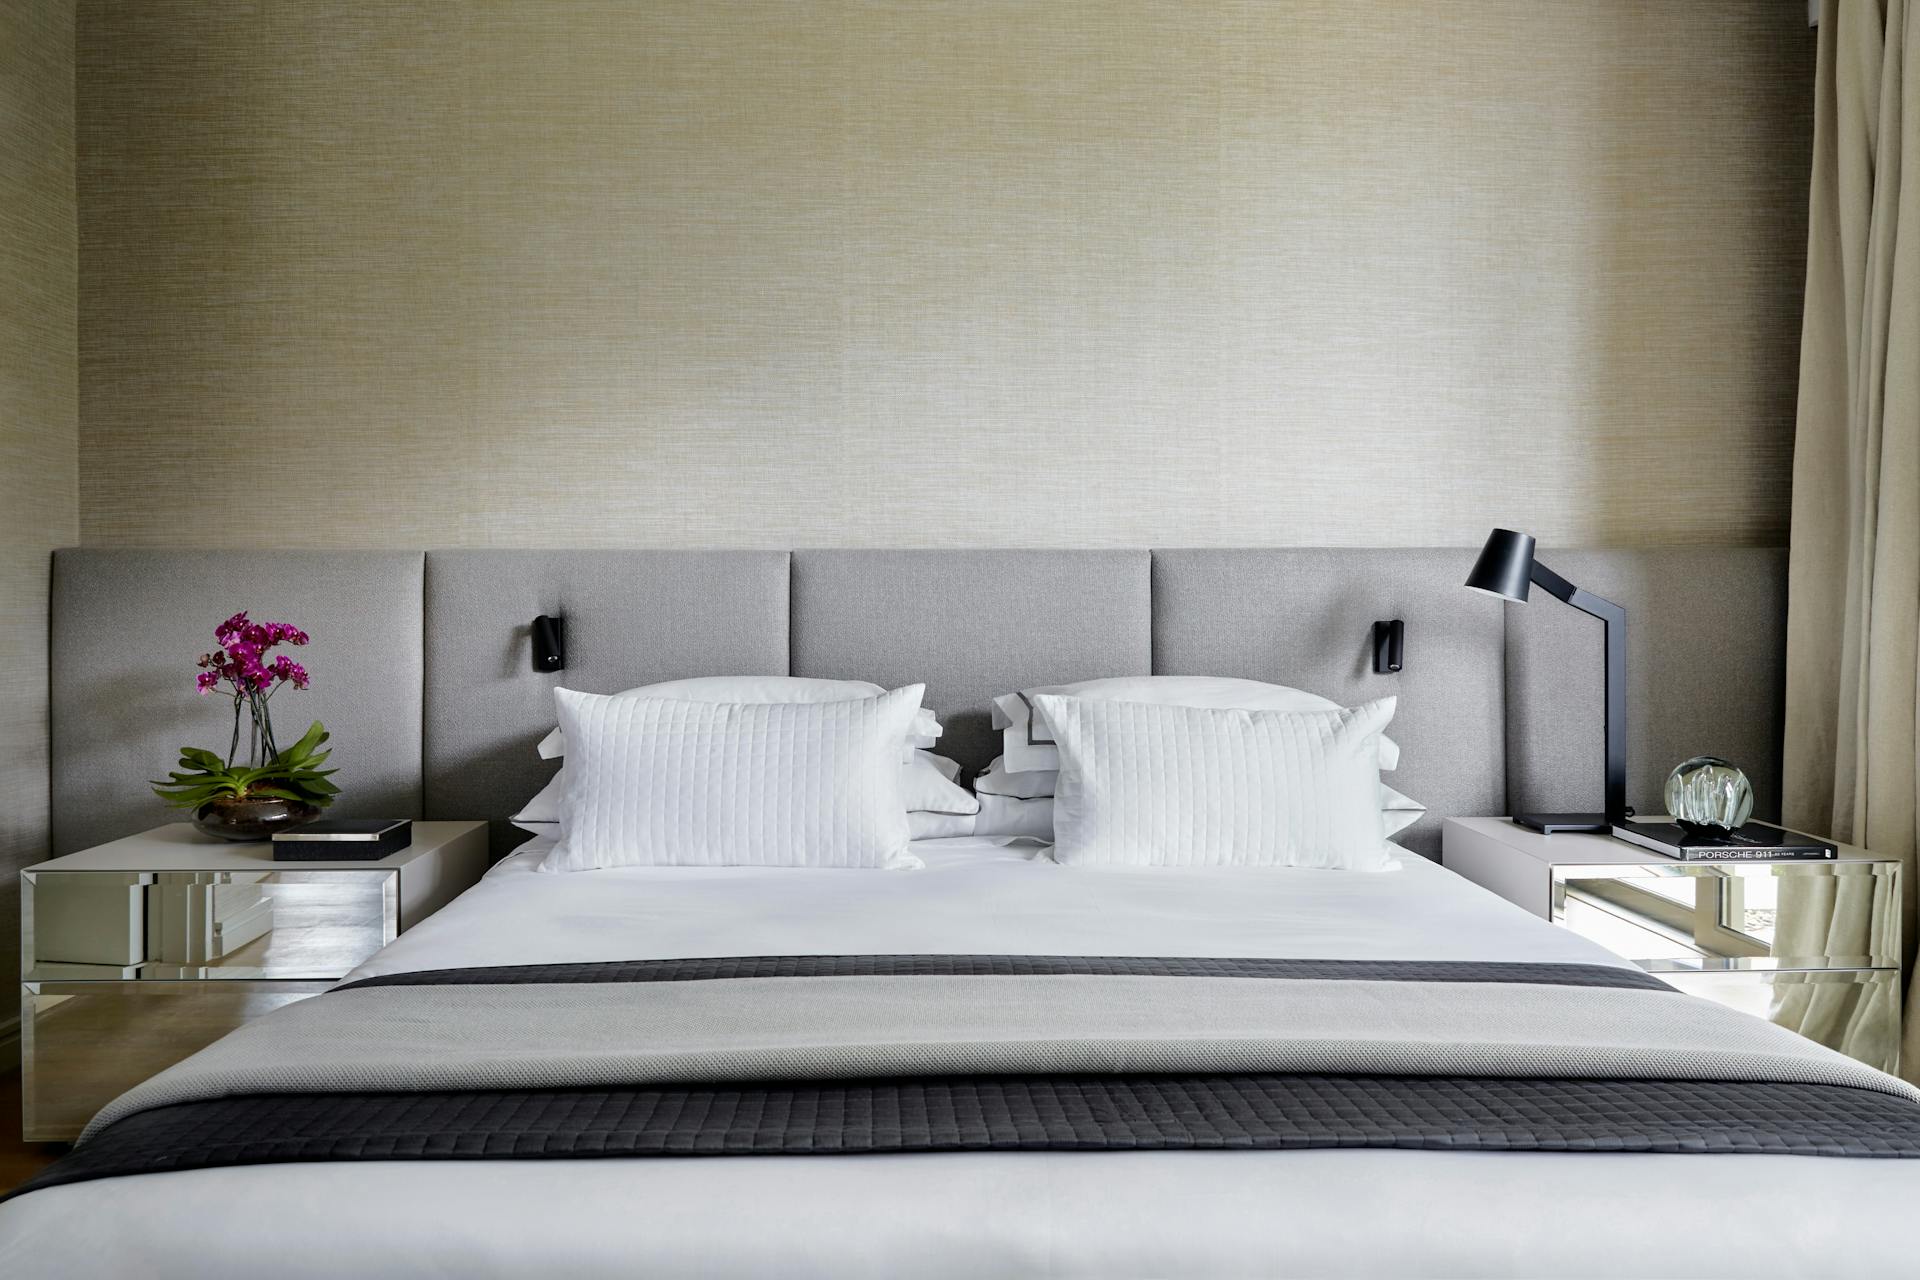 Close-up of a grey bed with a bedside table on either side. The bedding has a modern colour palette of whites, greys and black.